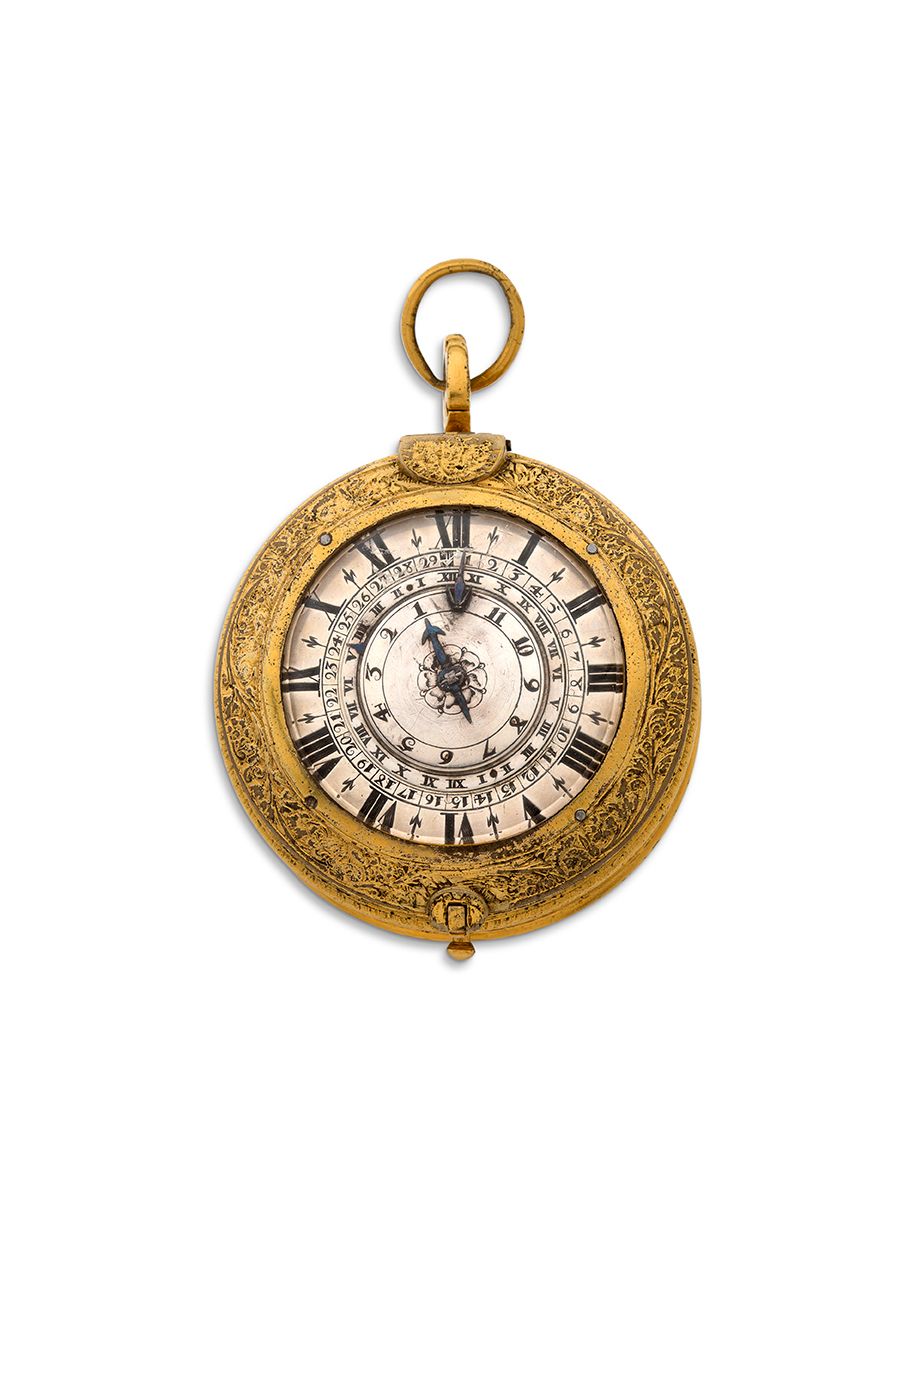 JOHN ROGERS 
Astronomical watch in gilt metal with alarm function



"Drum" shap&hellip;